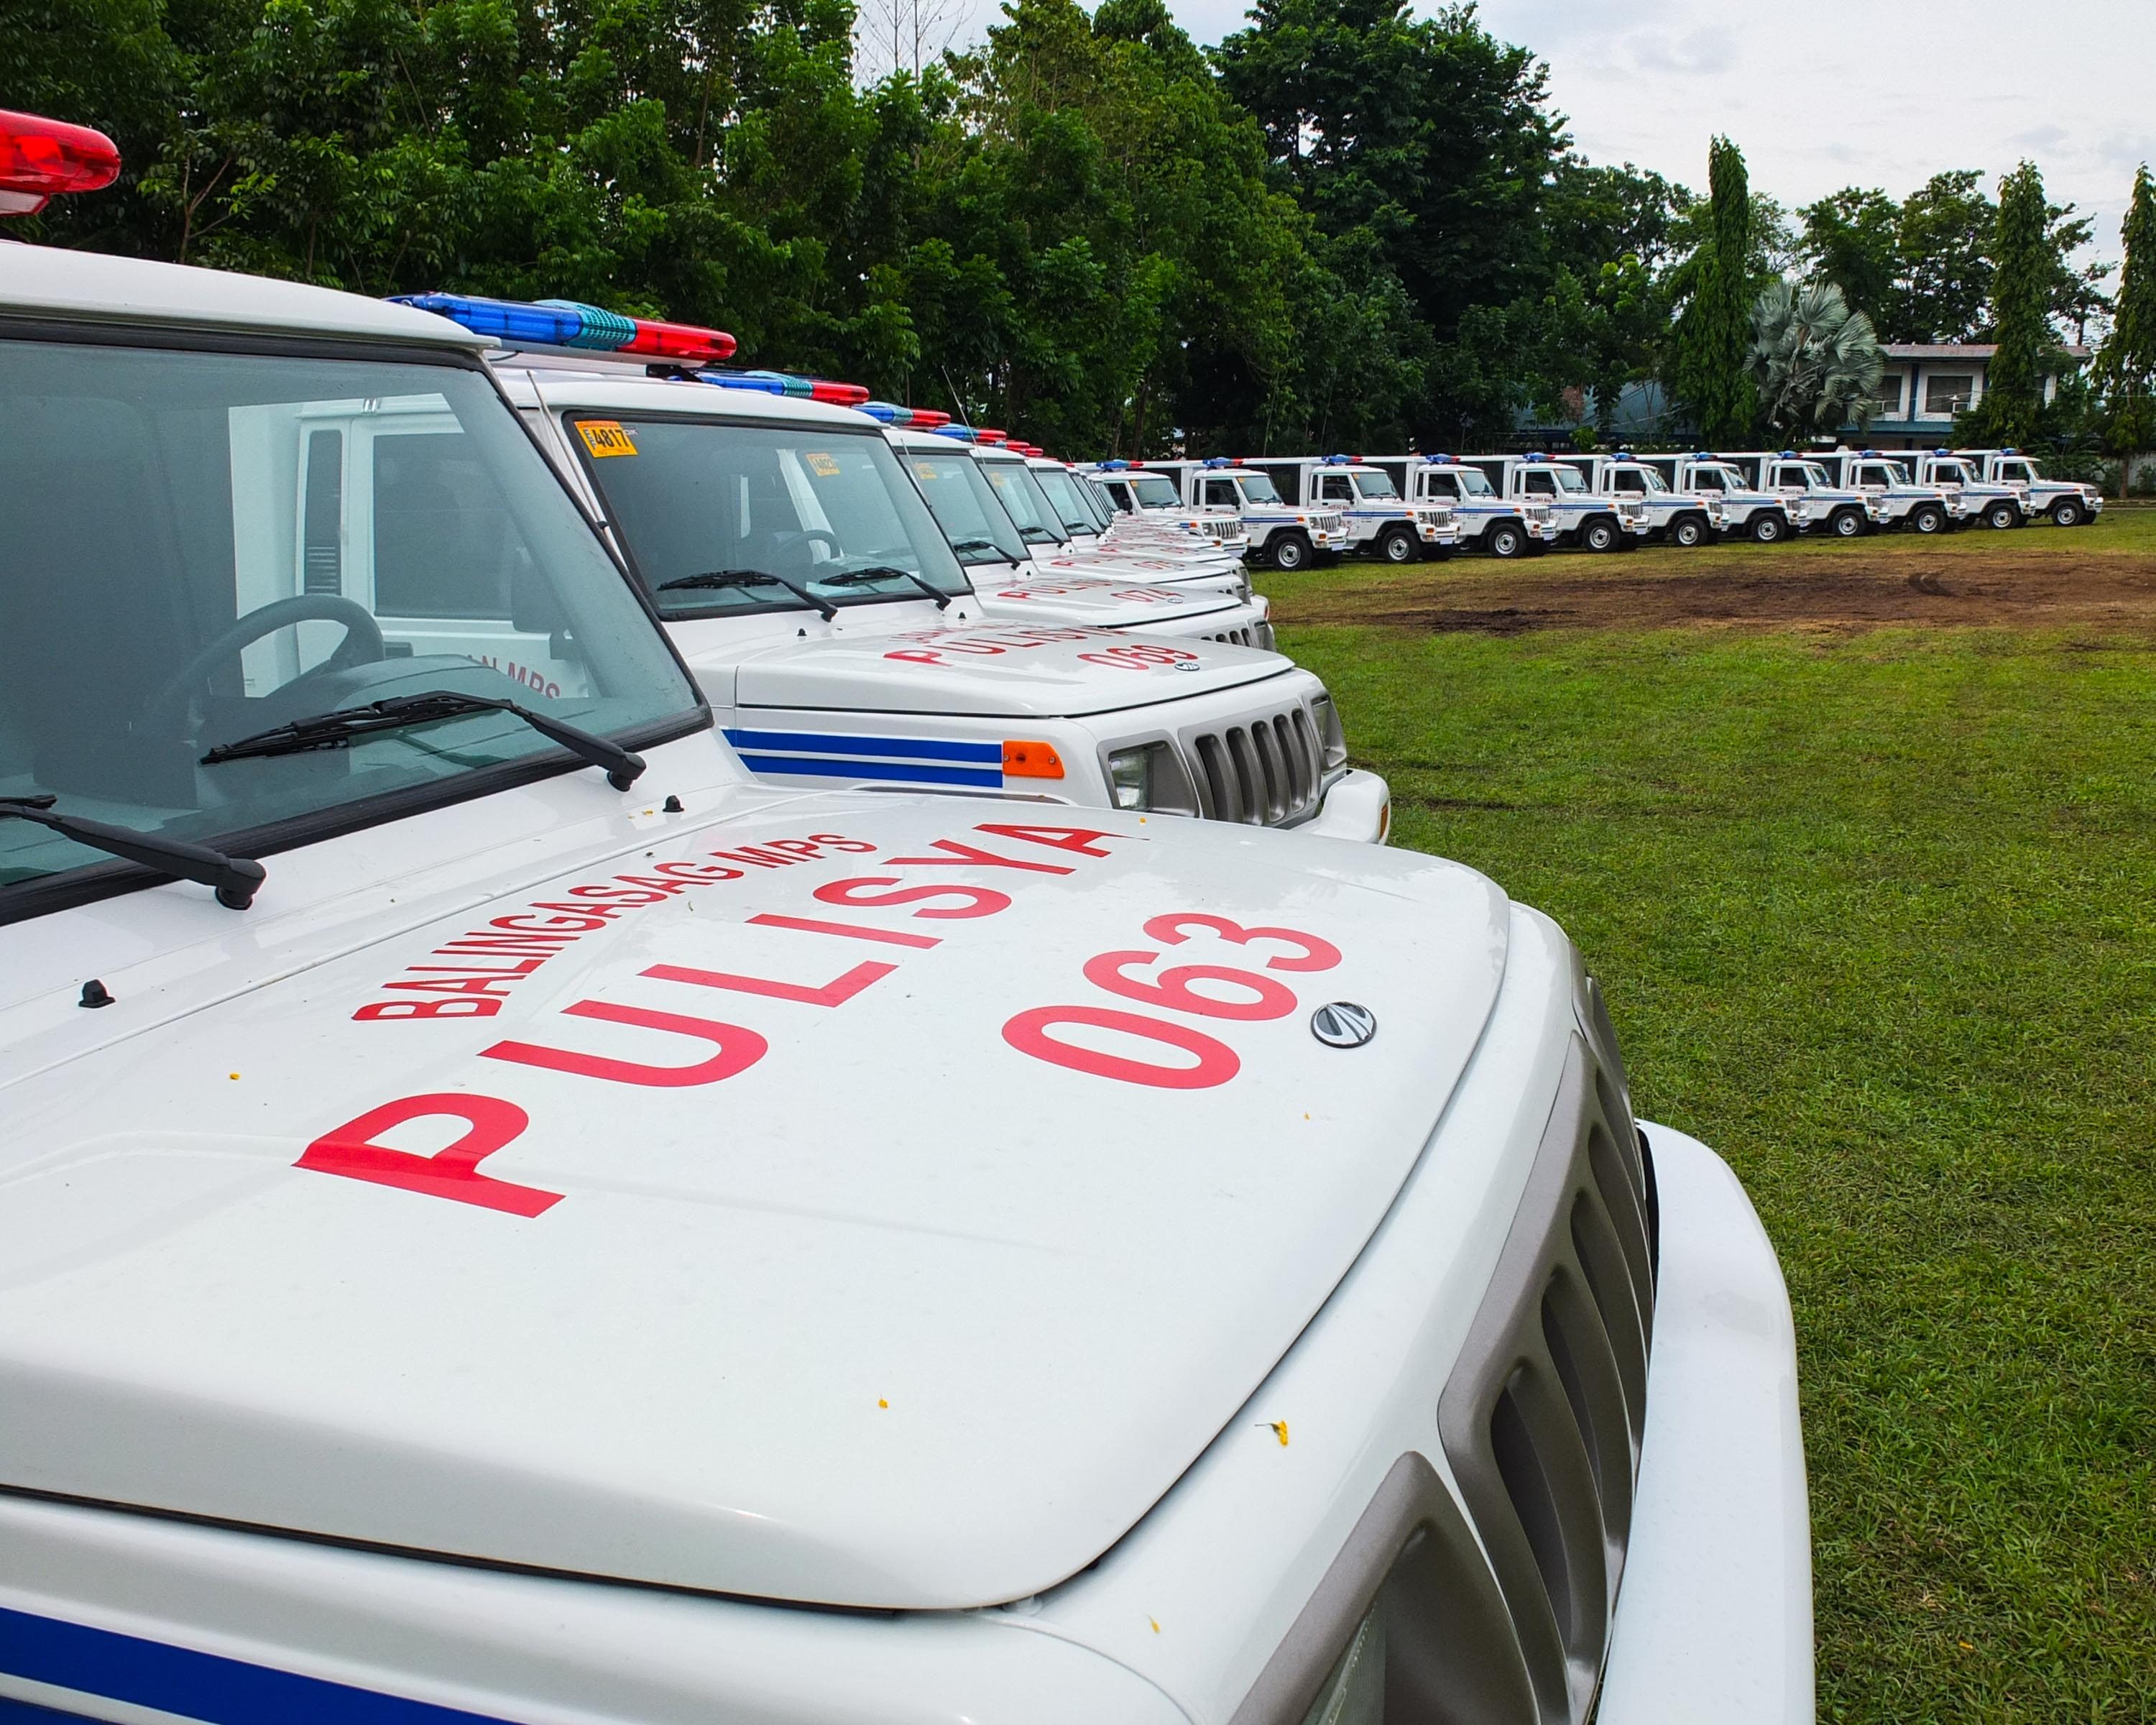 FOR PATROL. 23 units of this patrol jeep were distributed to the 23 towns of Misamis Oriental on Friday, July 3, 2015 at Camp Vicente Alagar, headquarters of the PNP in Northern Mindanao. Photo by Bobby Lagsa/Rappler 